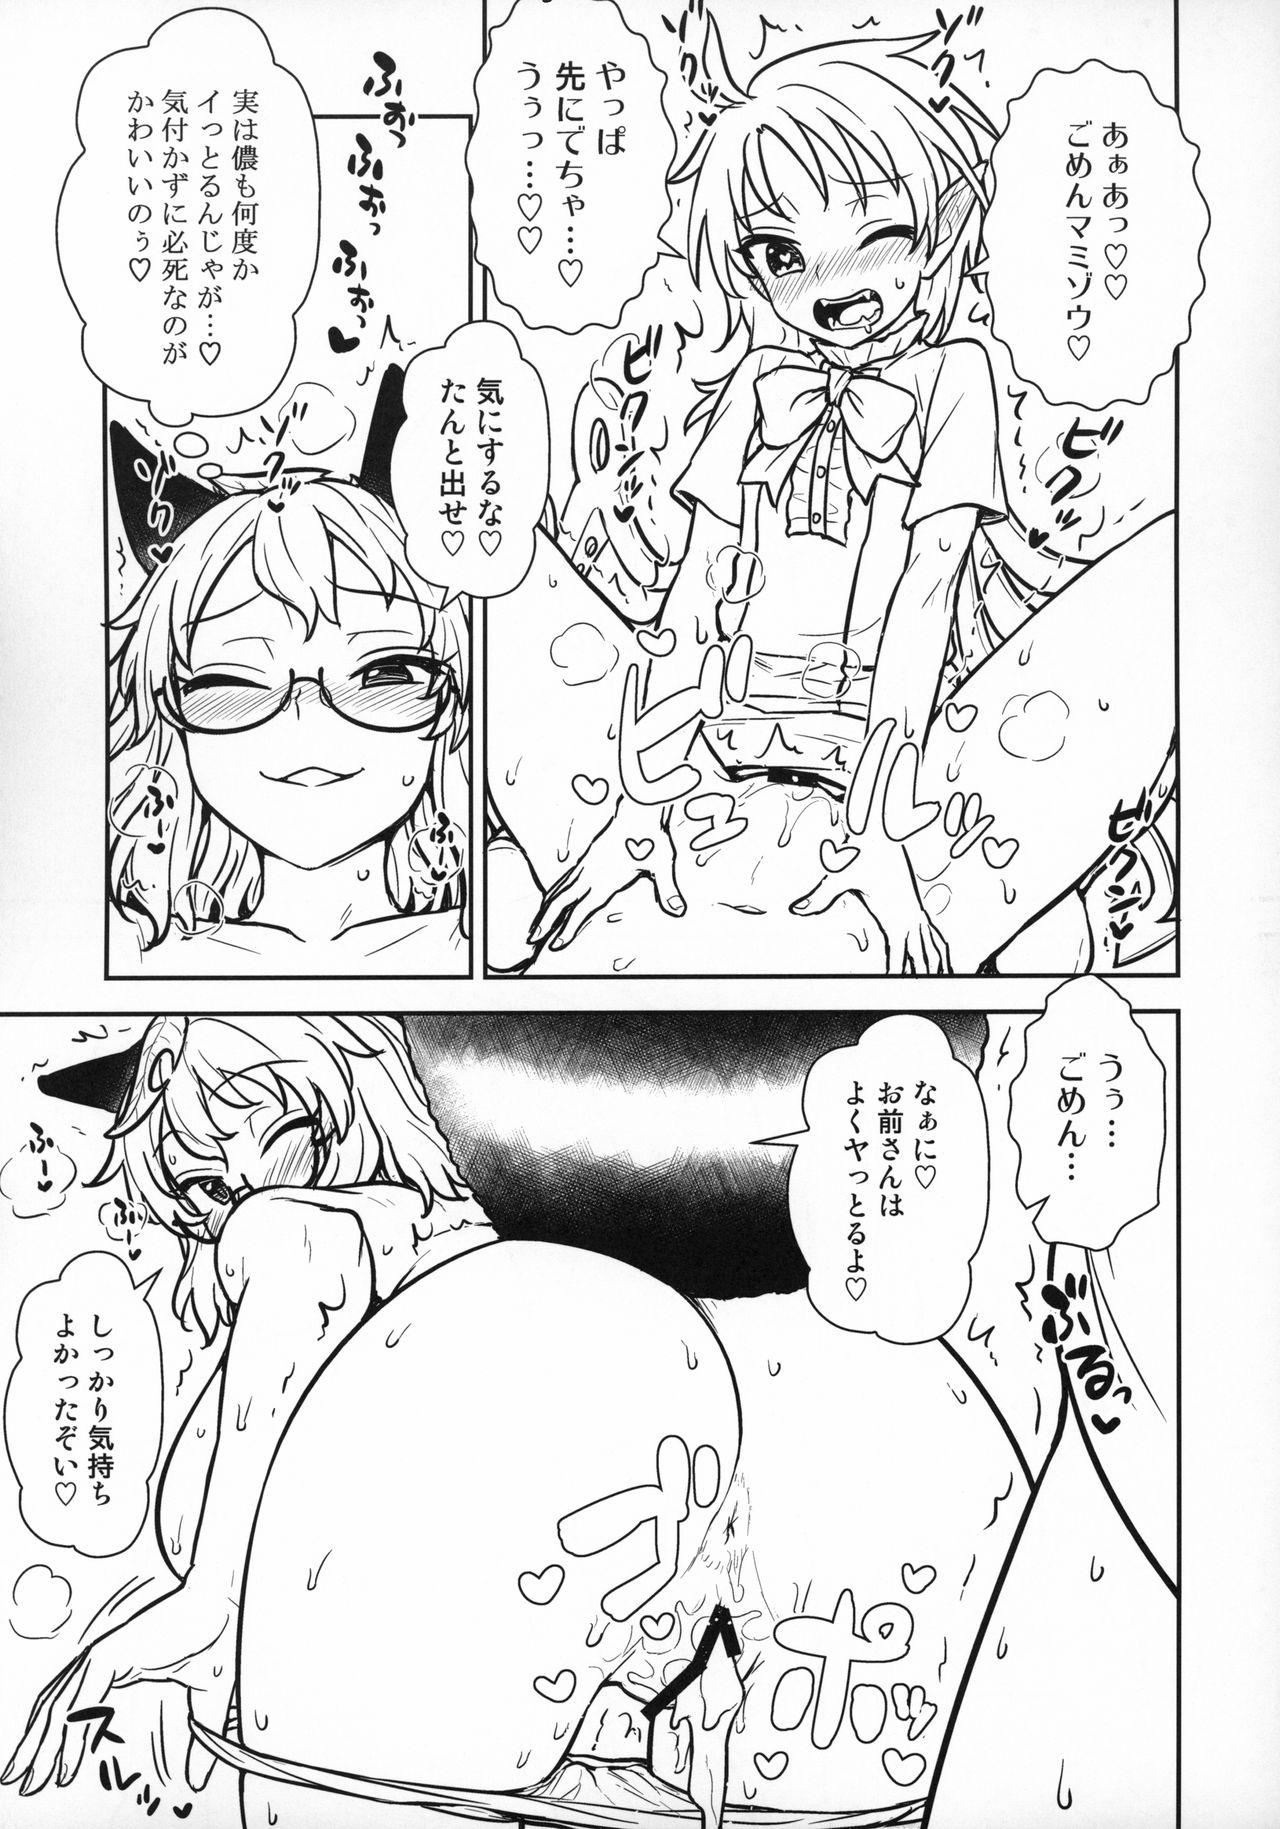 Stud (C96) [110-GROOVE (Itou Yuuji)] Nue-chan vs Mamizou-san (Touhou Project) - Touhou project Office Sex - Page 12